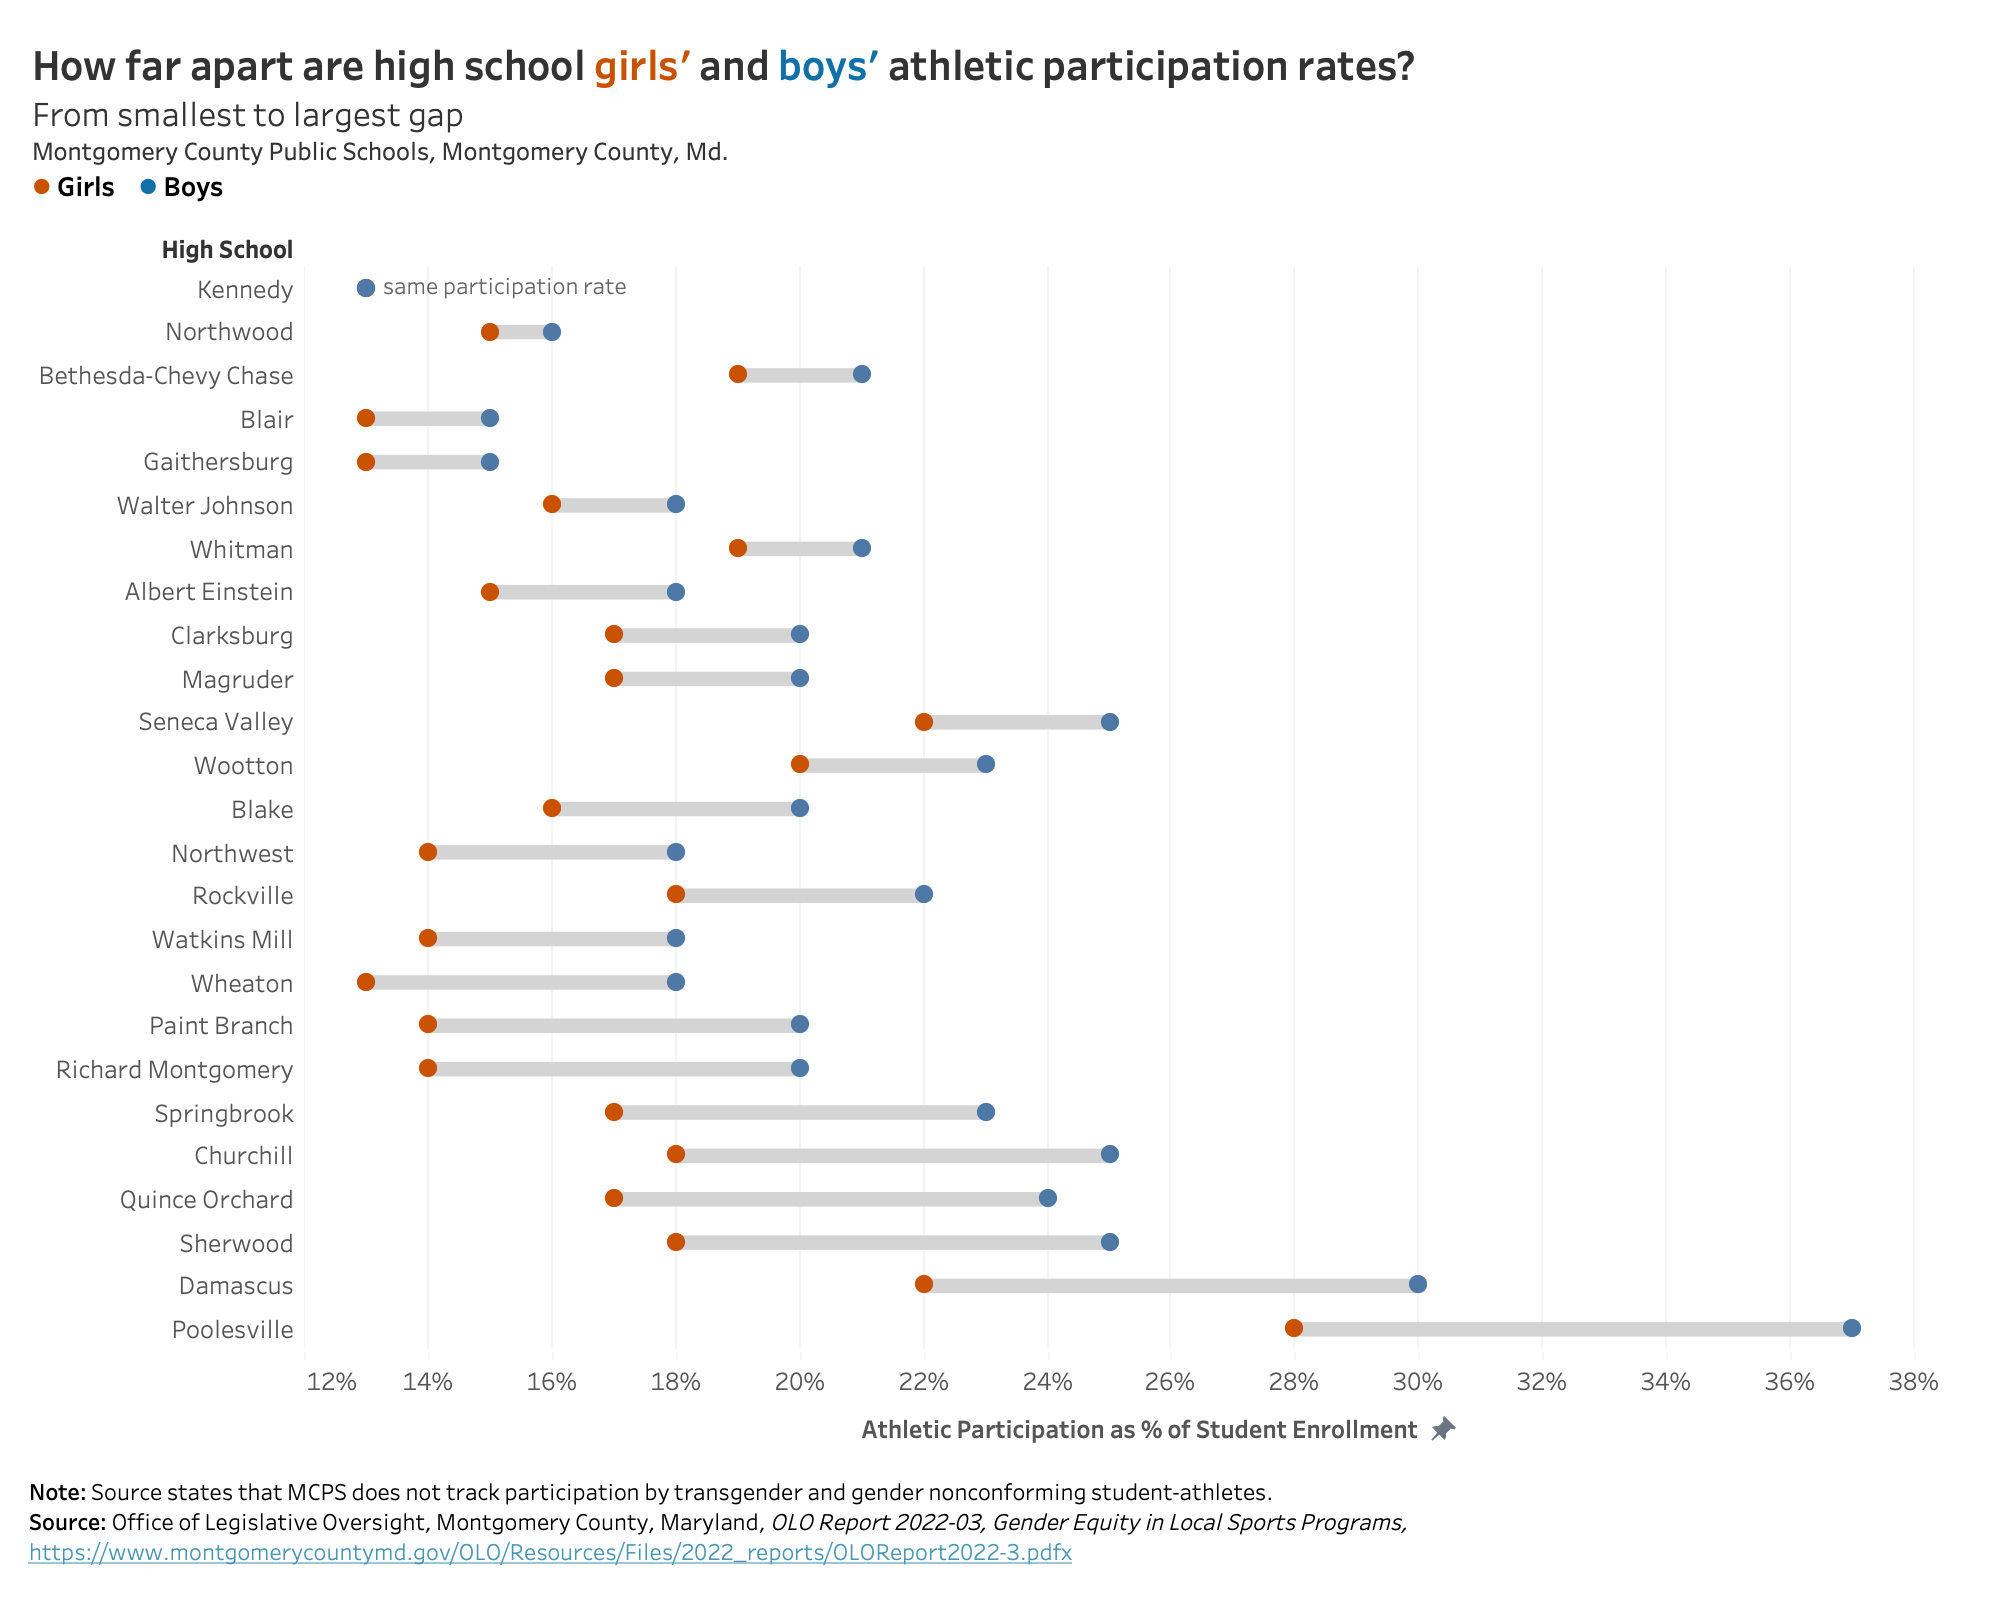 How-far-apart-are-high-school-girls-and-boys-athletic-participation-rates-1